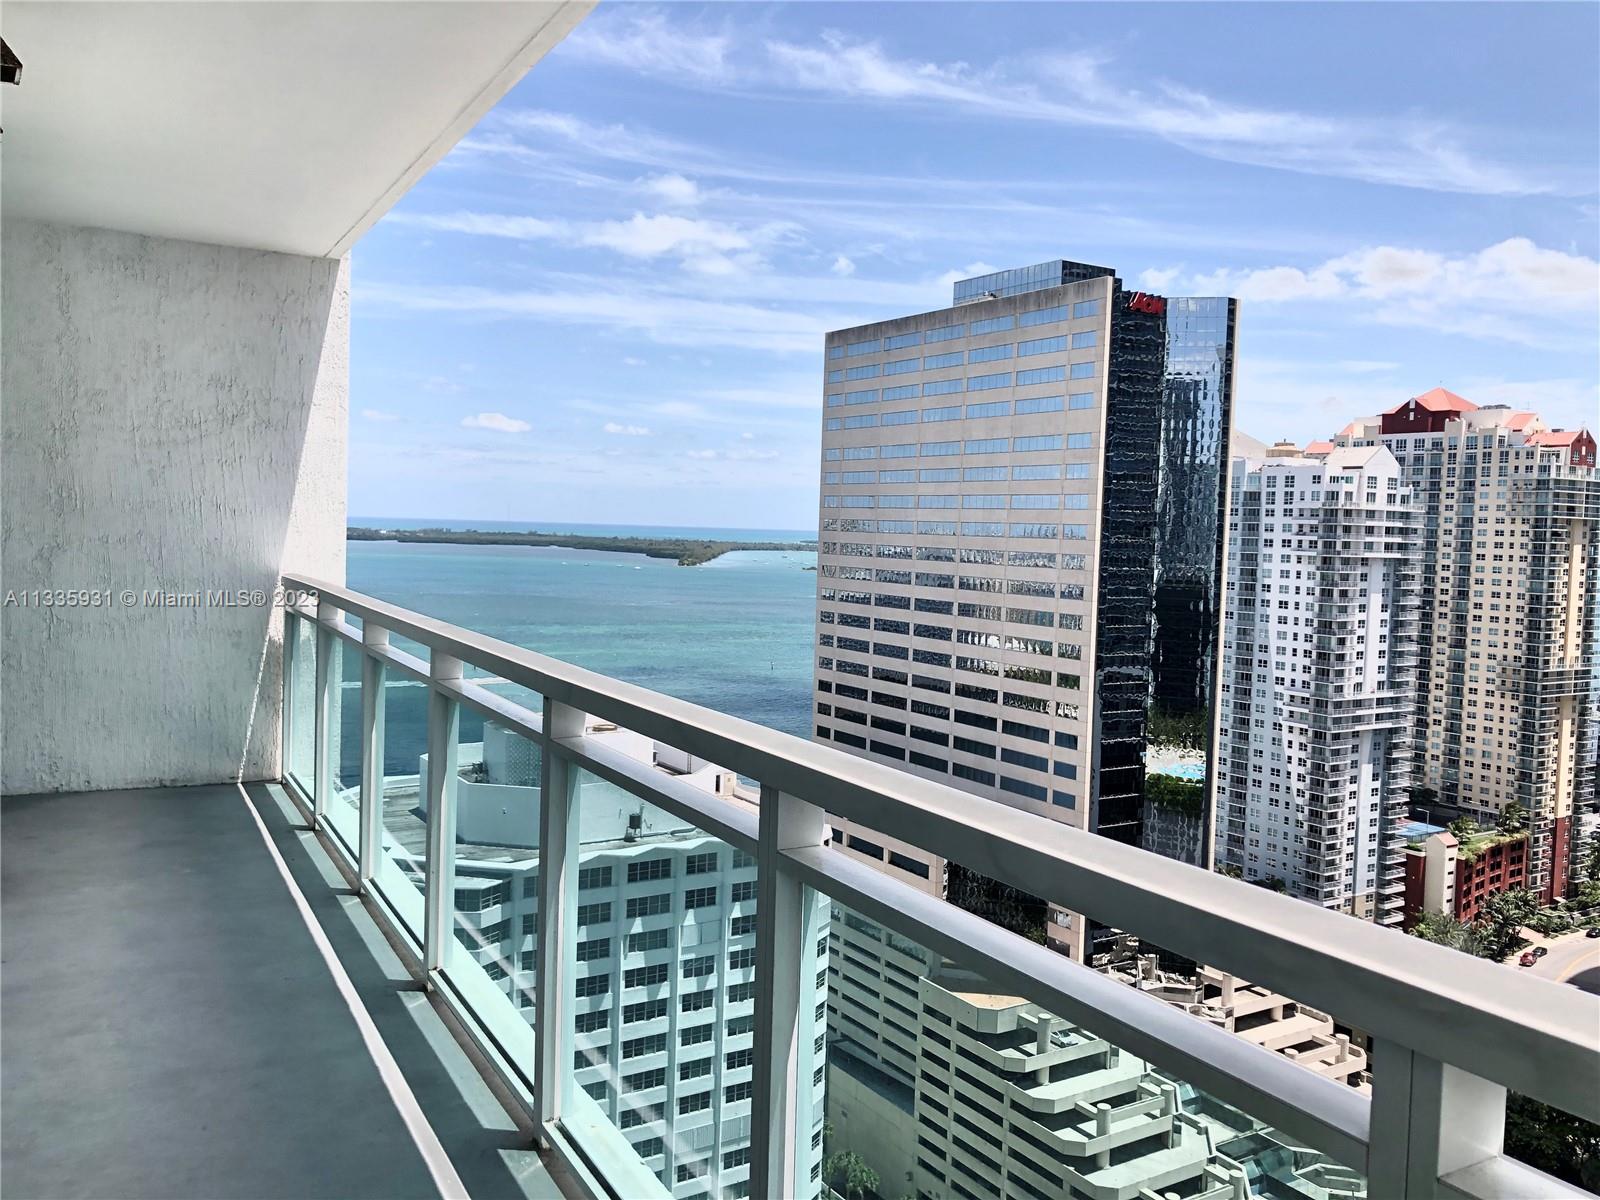 Beautiful 2 bed, 2 bath in The Plaza on Brickell. Staineless steel appliances, nice views to the Bay and pool deck. In
the heart of Brickell close to restaurants and shopping centers.